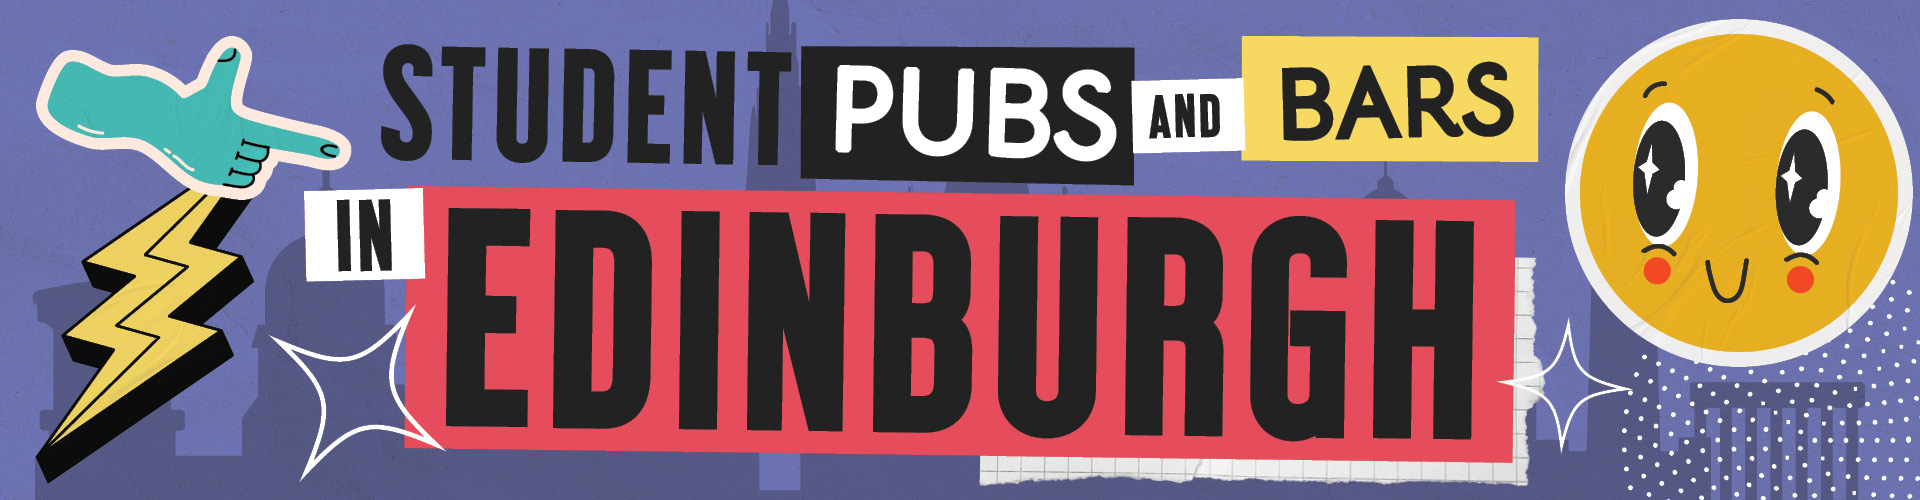 Student pubs and bars in Edinburgh